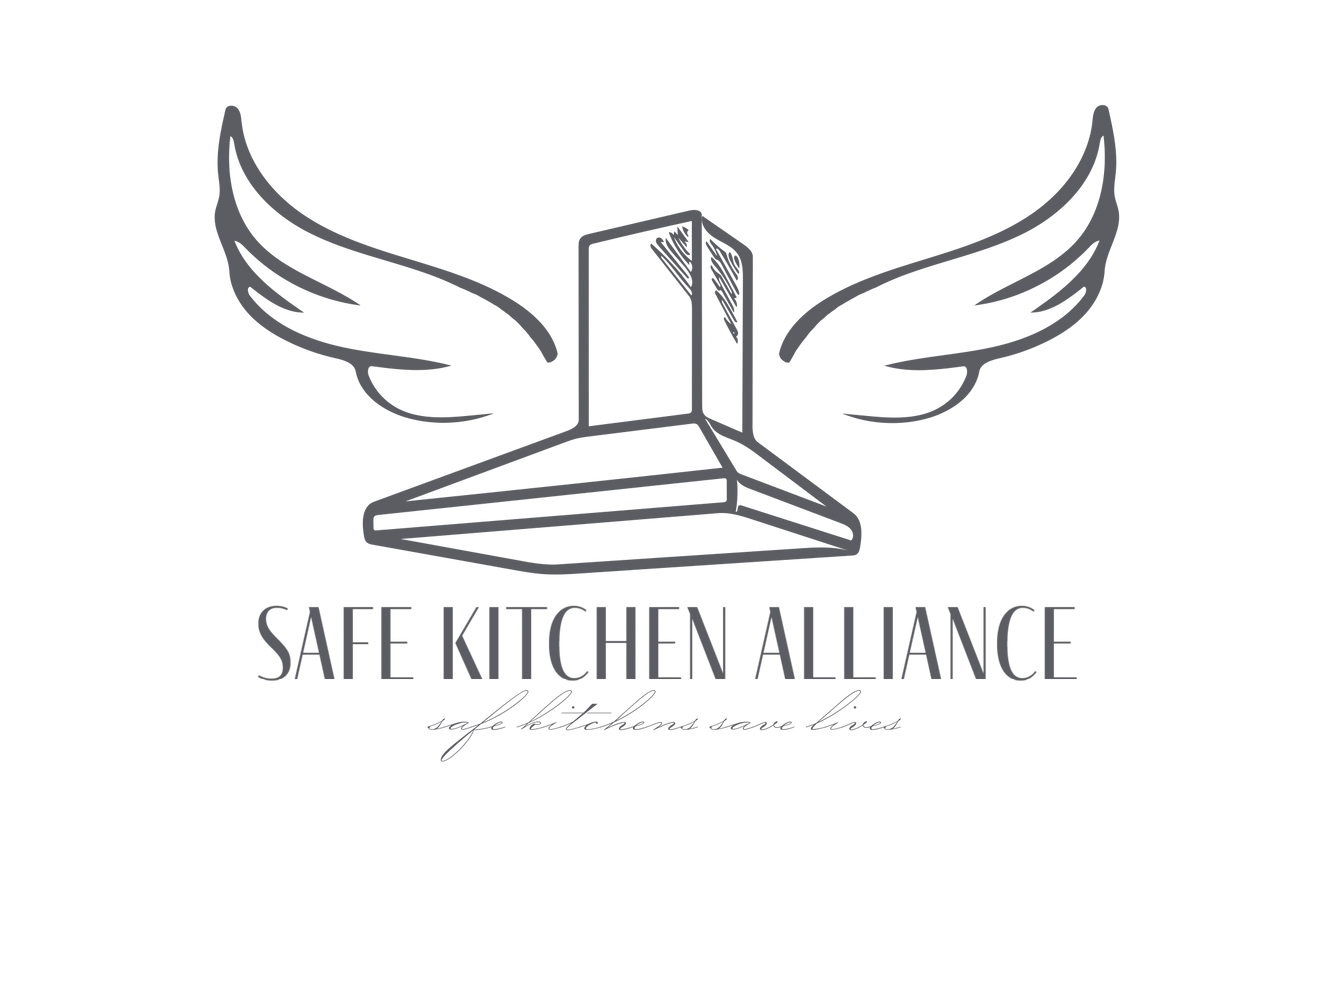 Safe Kitchen Alliance. 
Kitchen Exhaust Cleaning, sustainability environmental protection nonprofit.